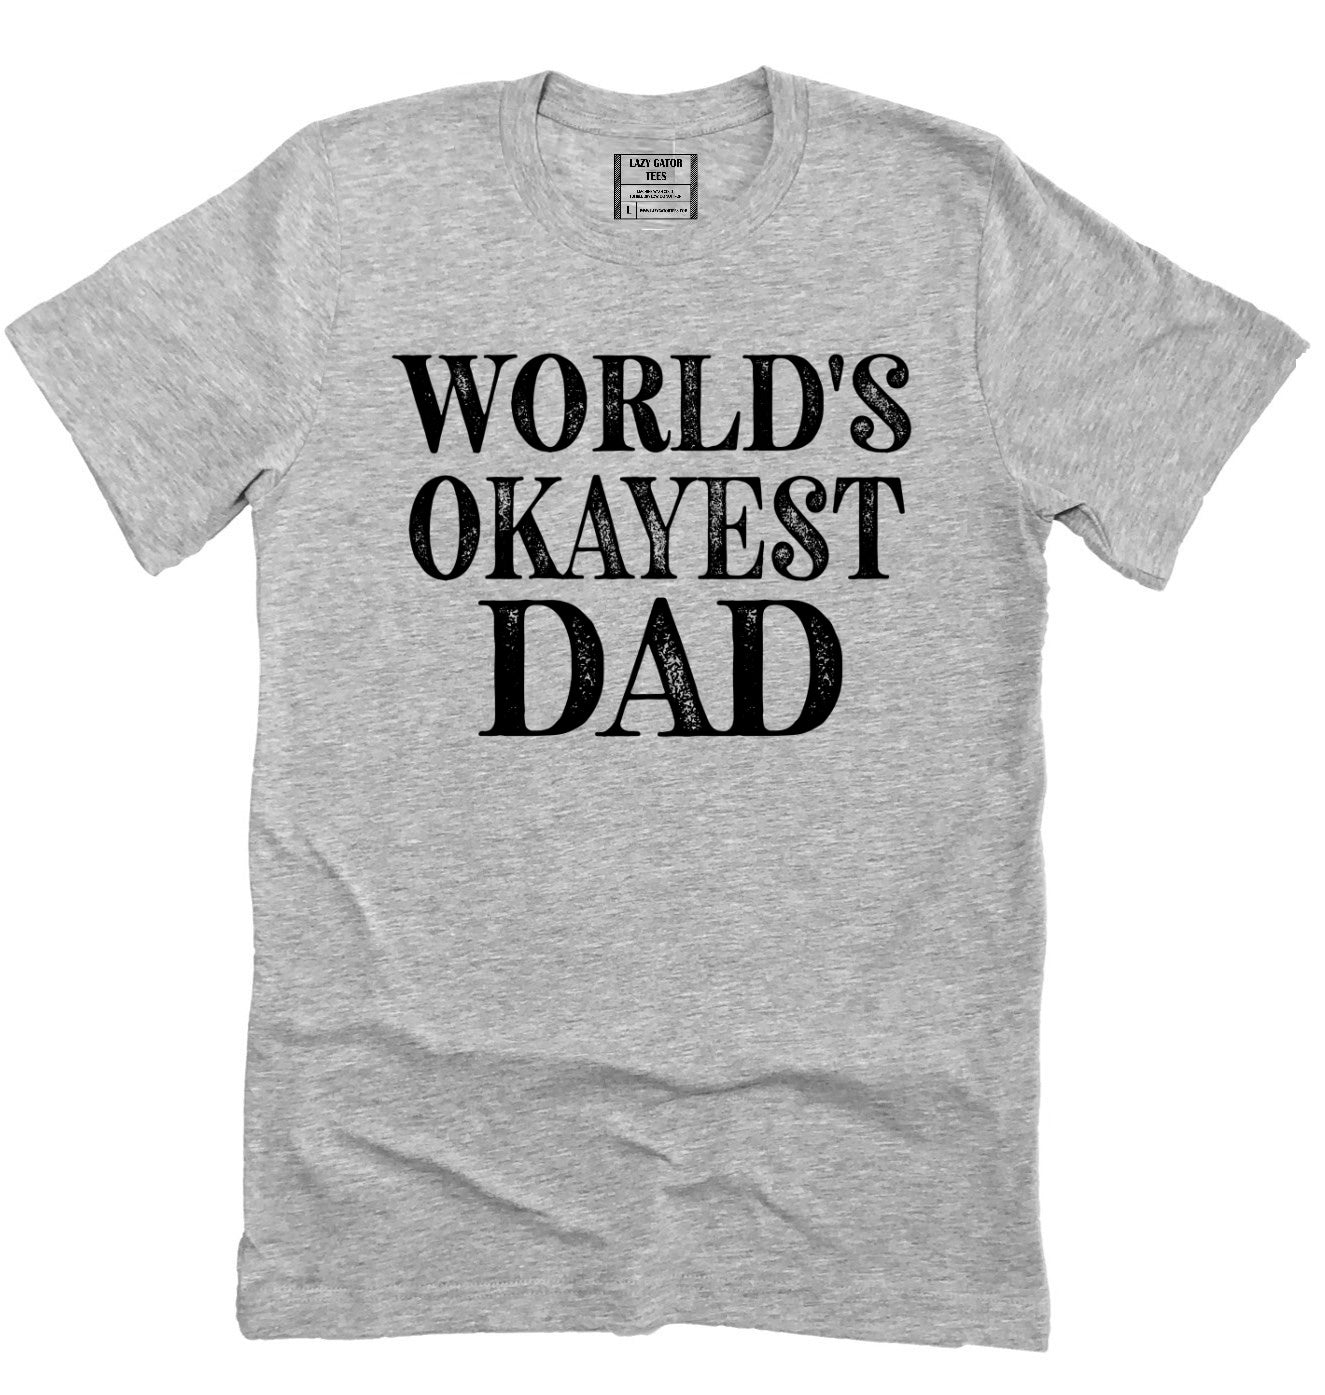 World's Okayest Dad Funny Father's Day Shirt Novelty T-shirt Tee